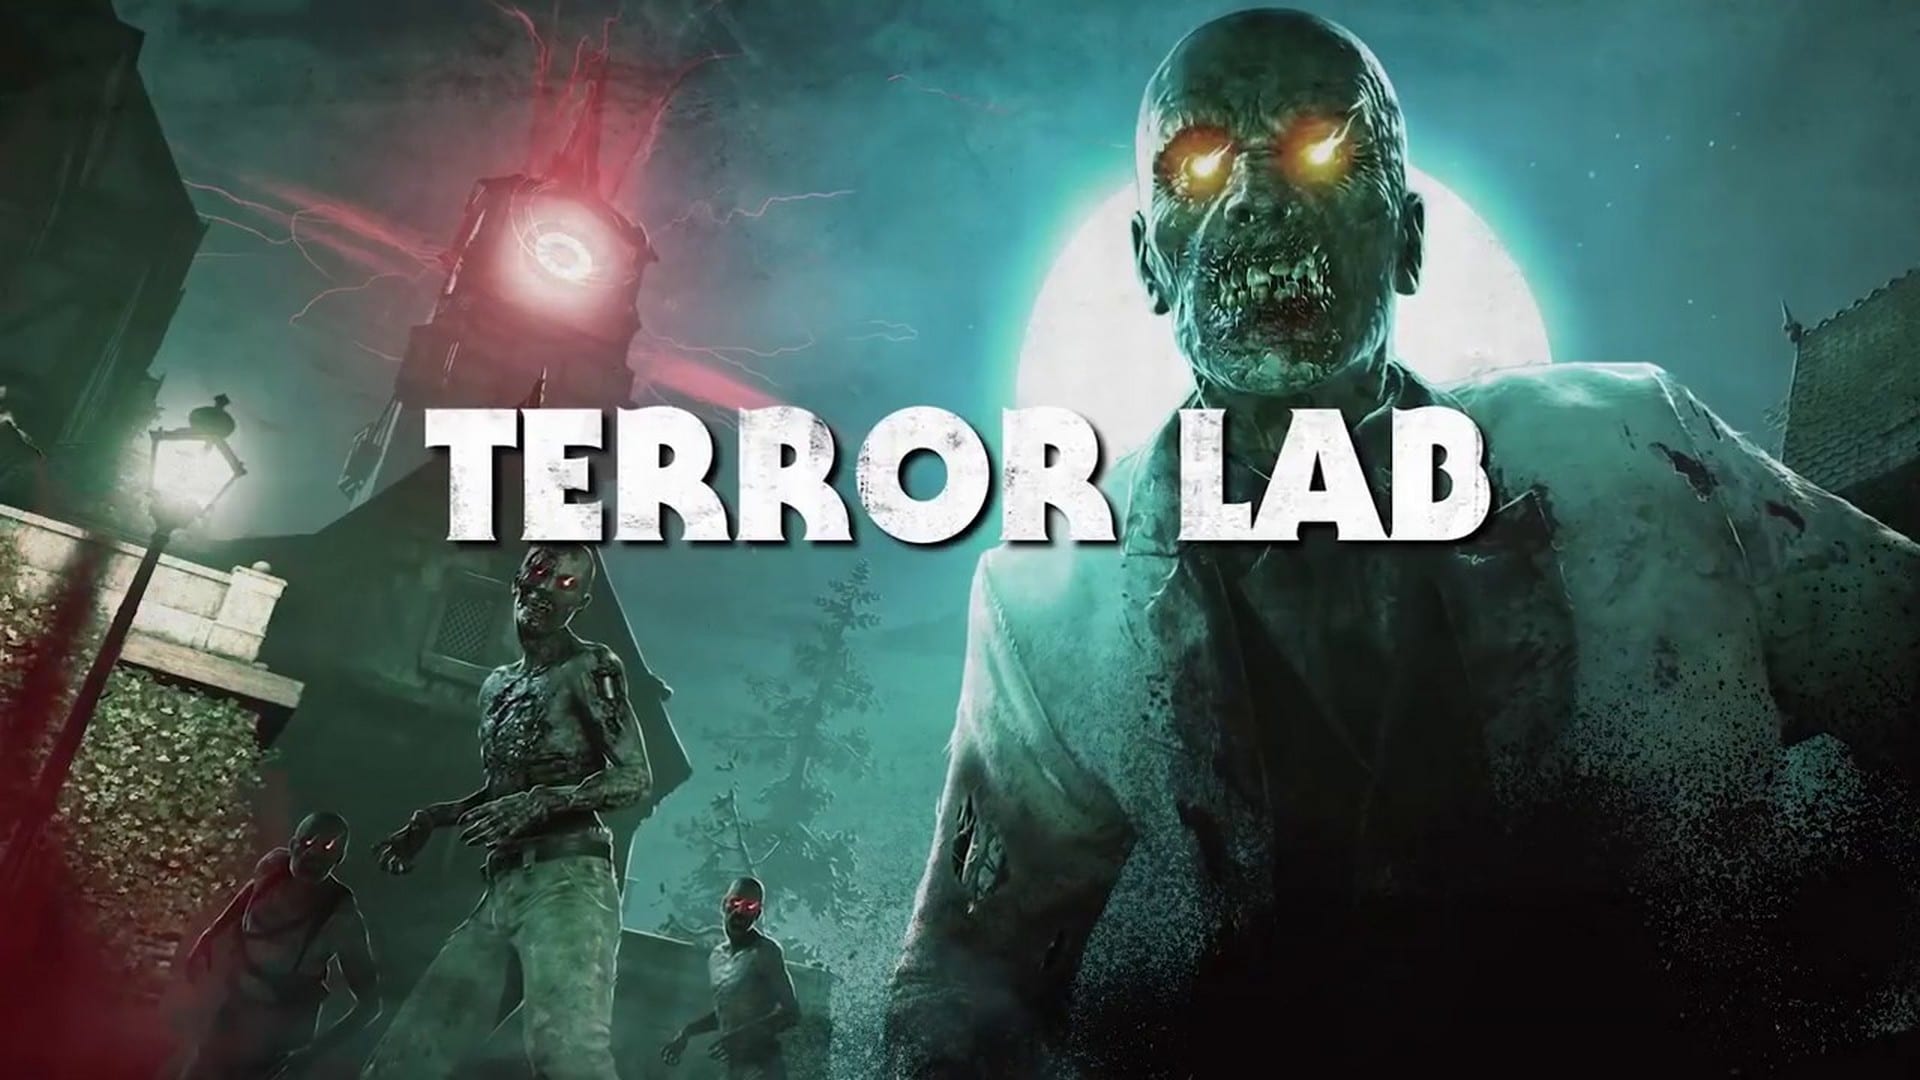 Zombie Army 4 New Campaign Mission “Terror Lab” Now Available